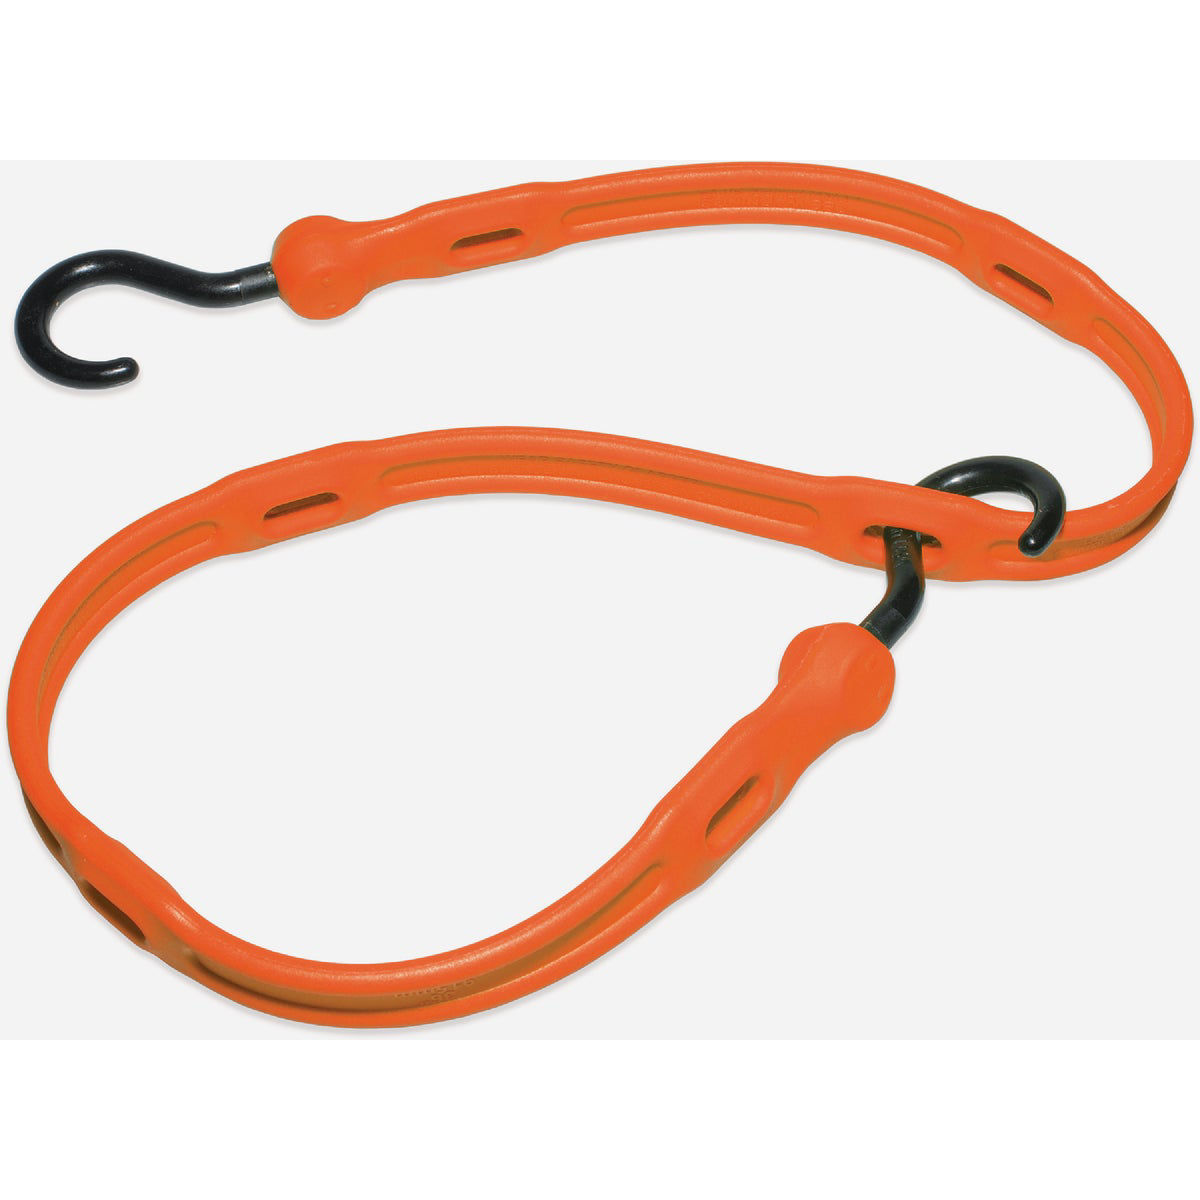 The Perfect Bungee 36 In. Adjust A Strap, Premium Polyurethane Adjustable  Bungee Strap with Nylon Hooks, Orange (4-Pack)